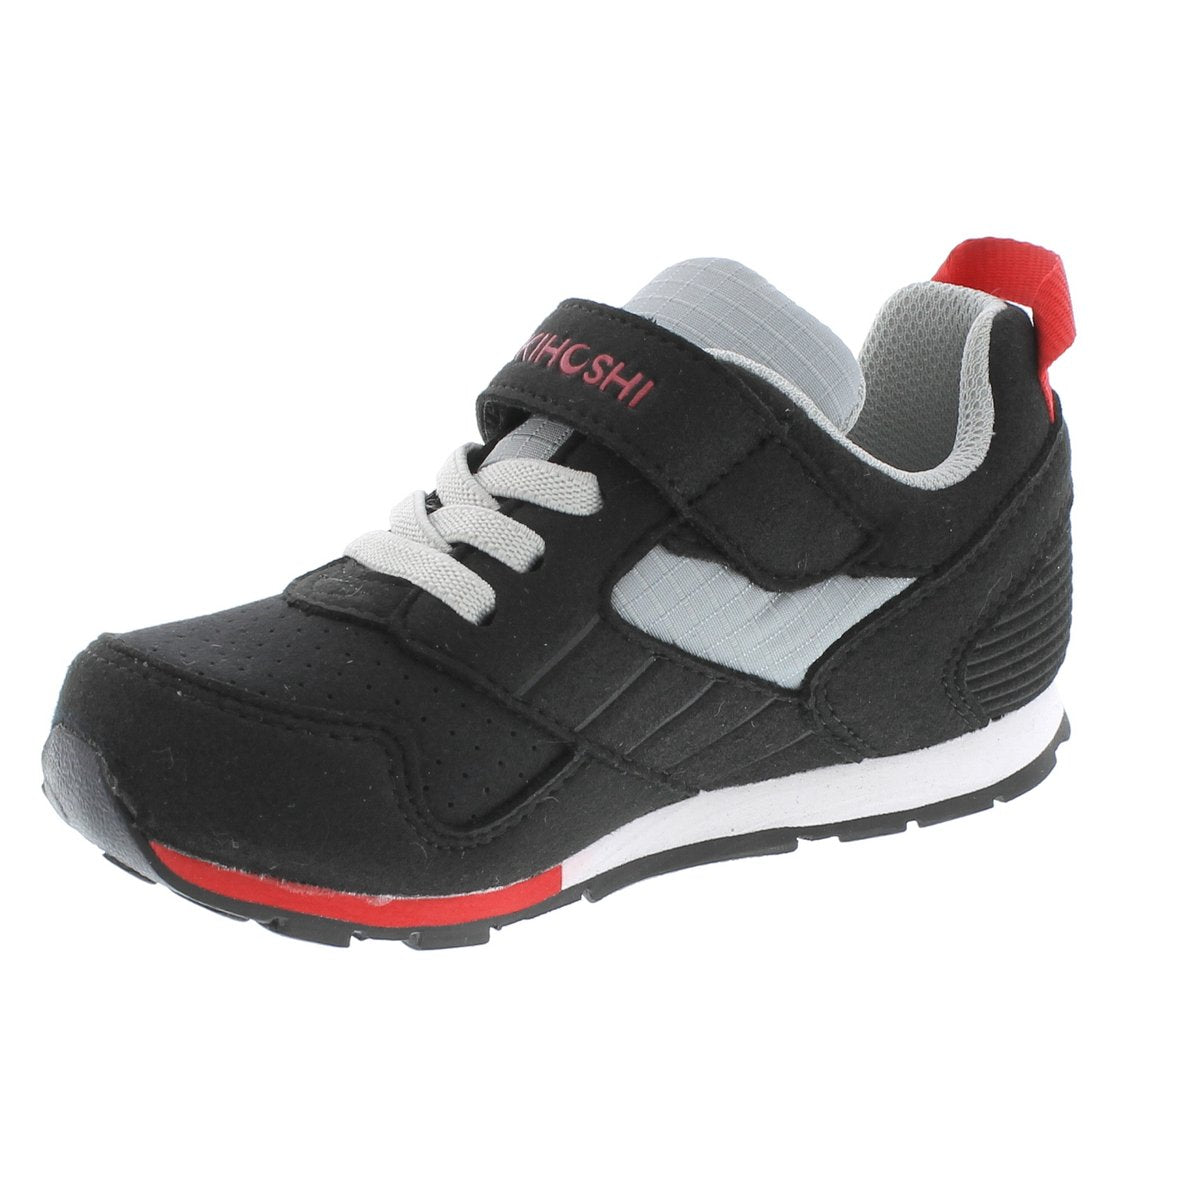 Child Tsukihoshi Racer Sneaker in Black/Red from the front view